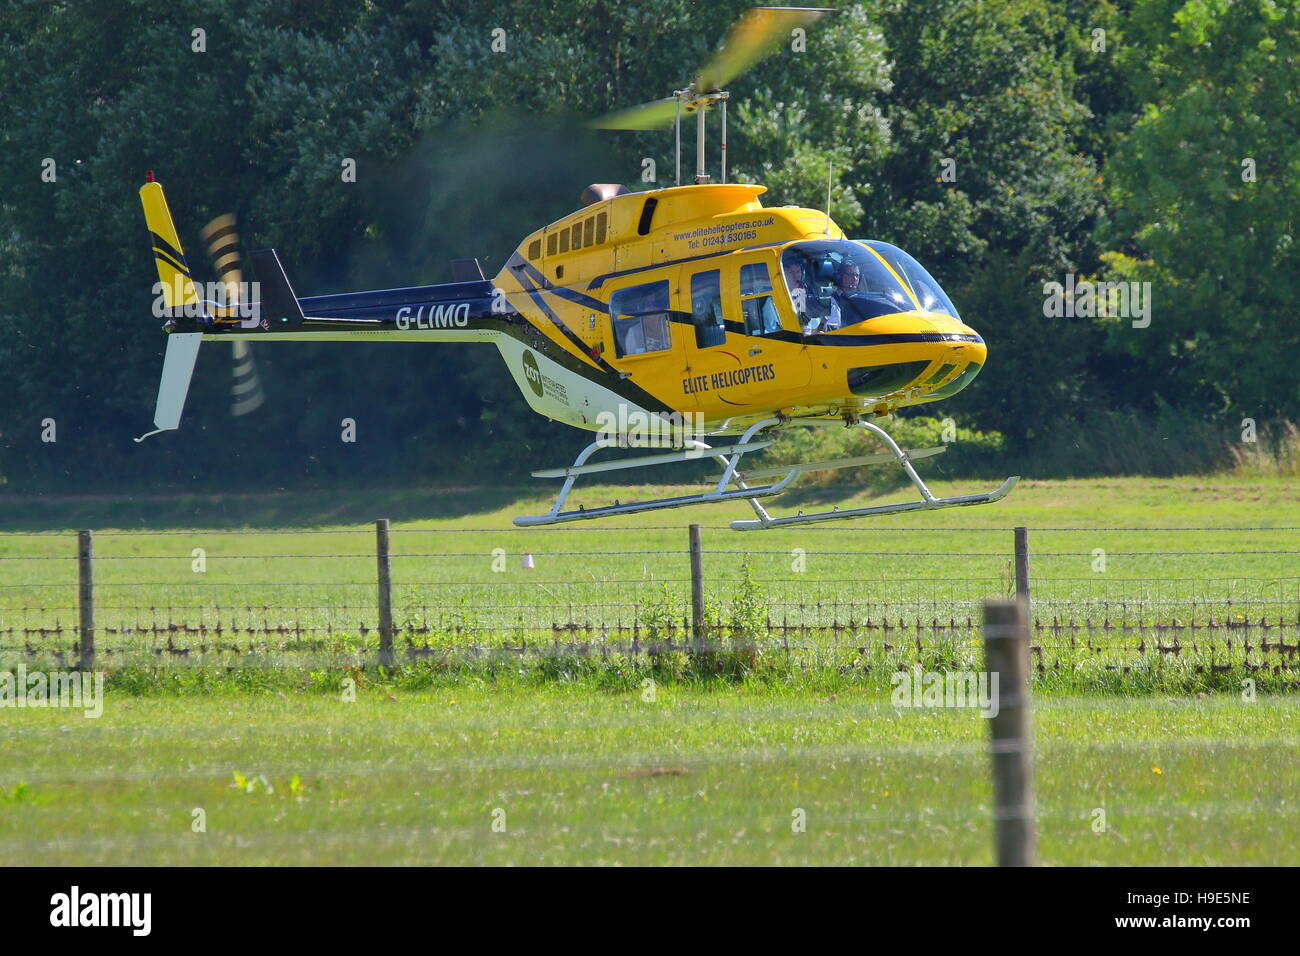 Elite Helicopters Bell 206L-1 LongRanger II G-LIMO helicopter landing in Henley-on-Thames, Mill Meadows Stock Photo